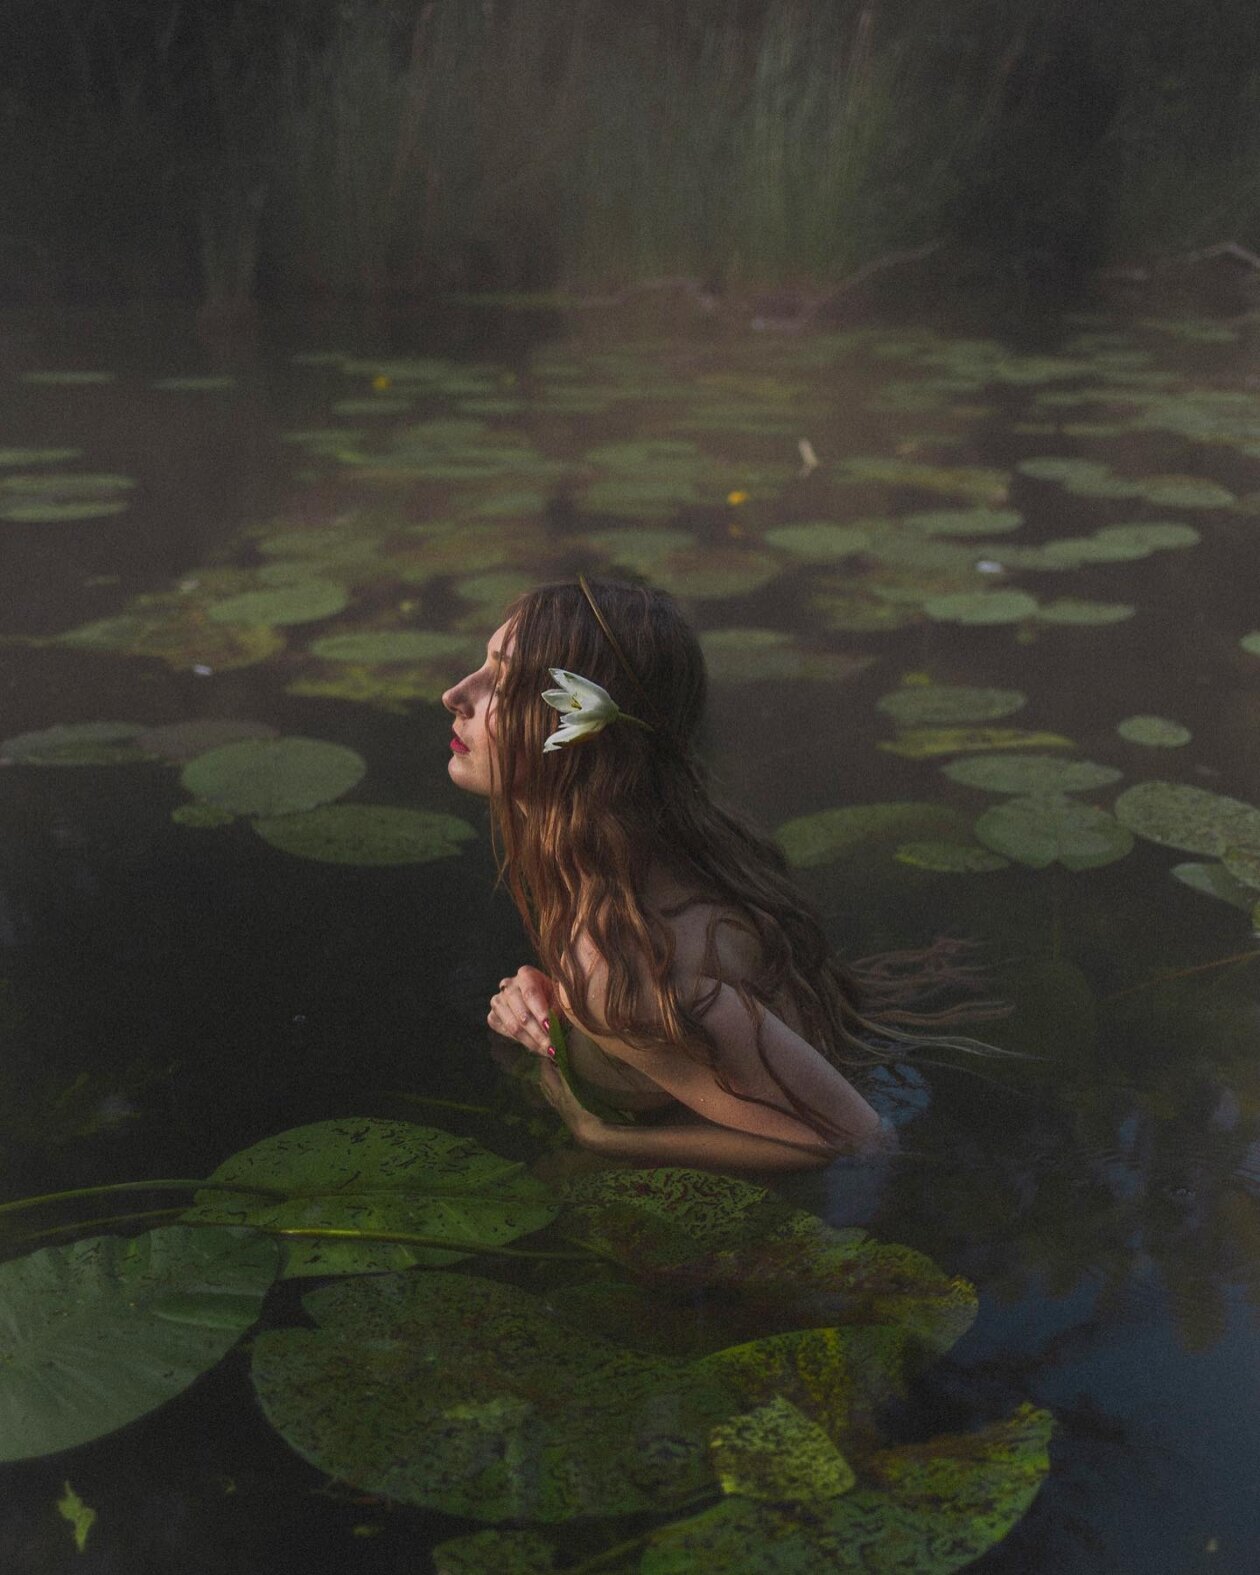 The Ethereal Female Photography Of Jenny Kaiser (3)